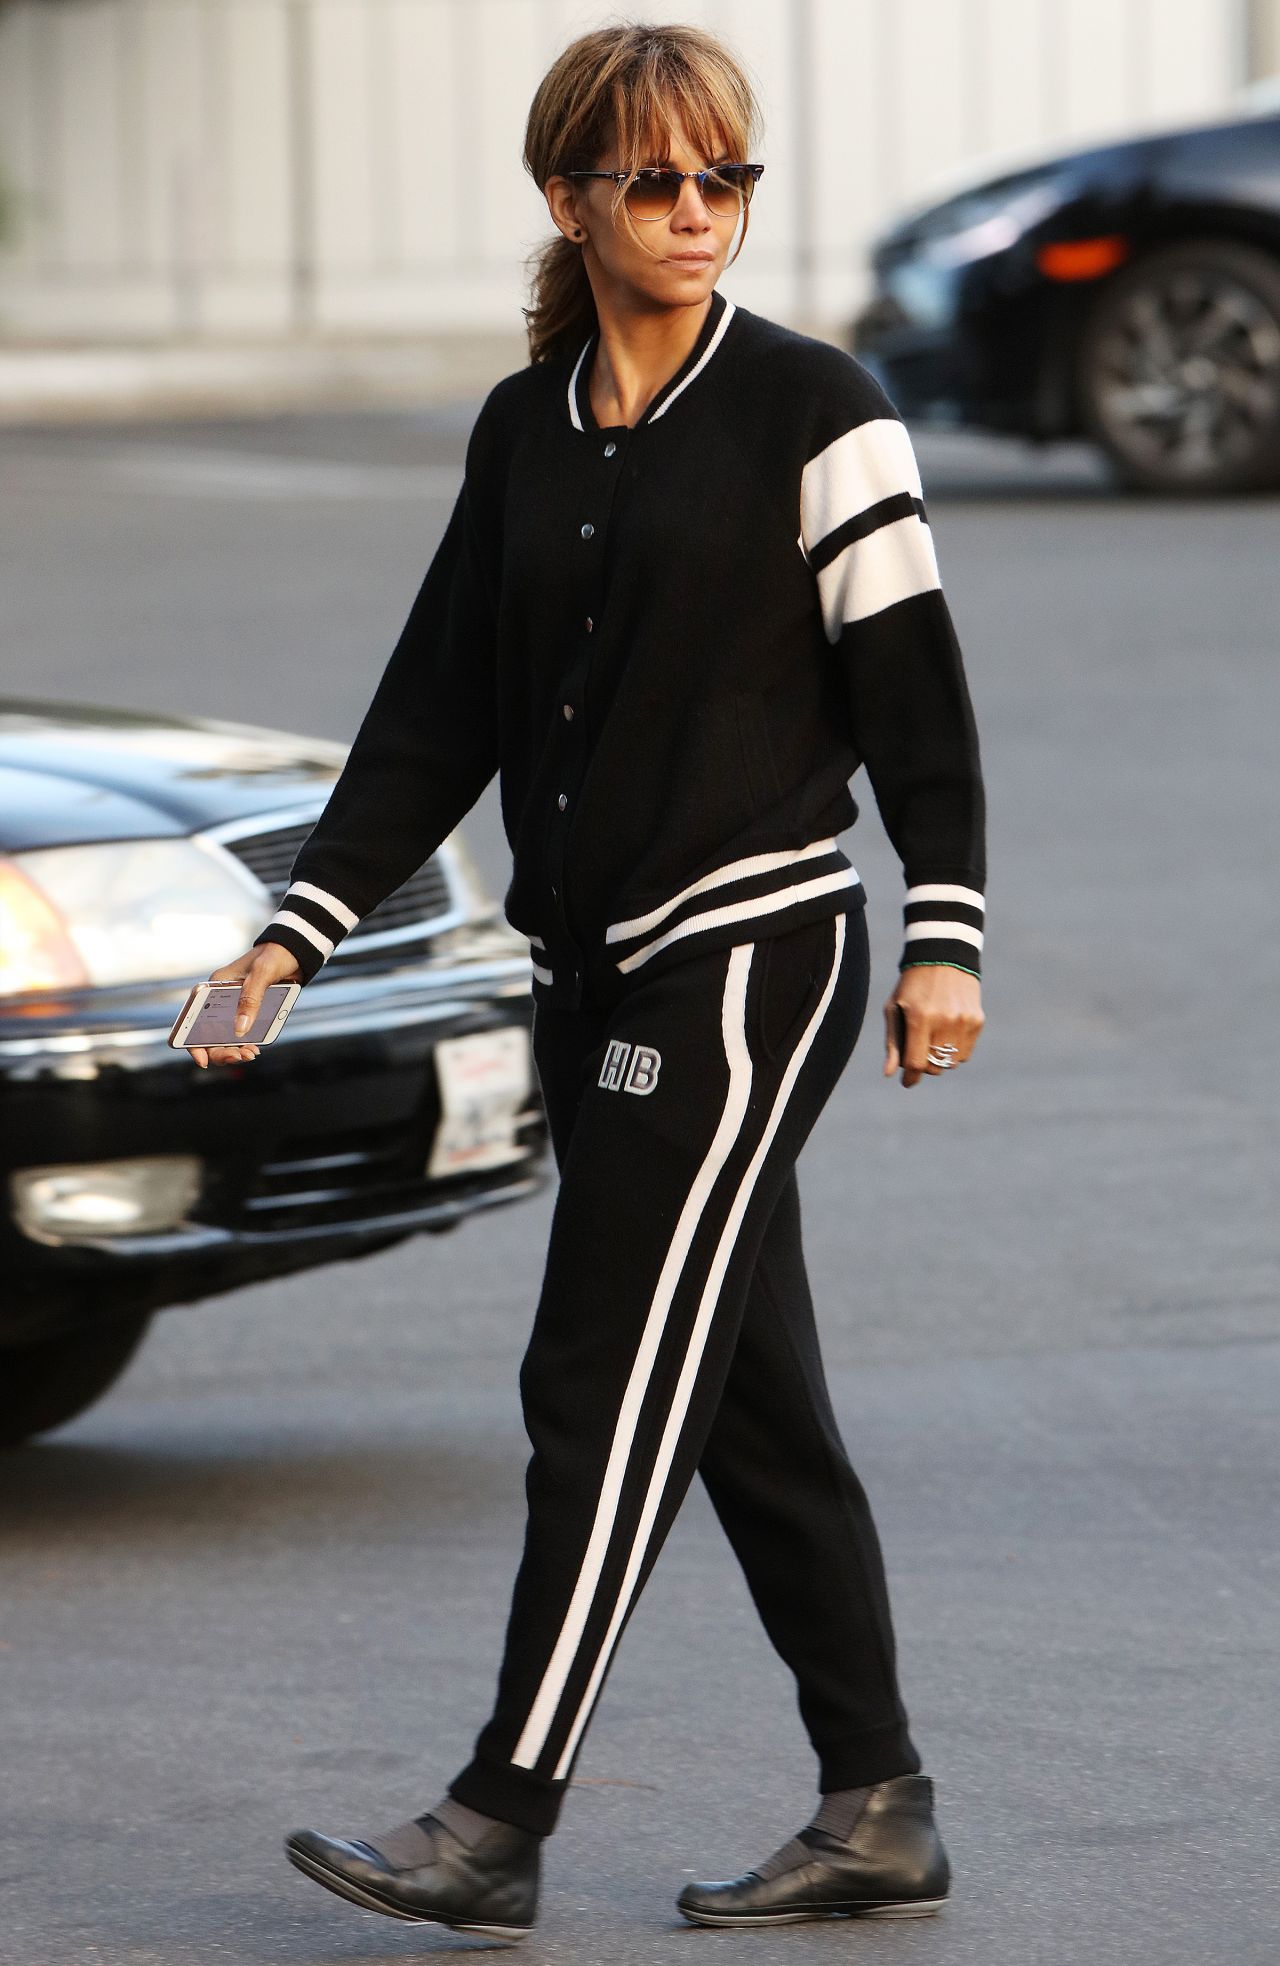 halle-berry-shopping-in-beverly-hills-01-03-2019-15.jpg